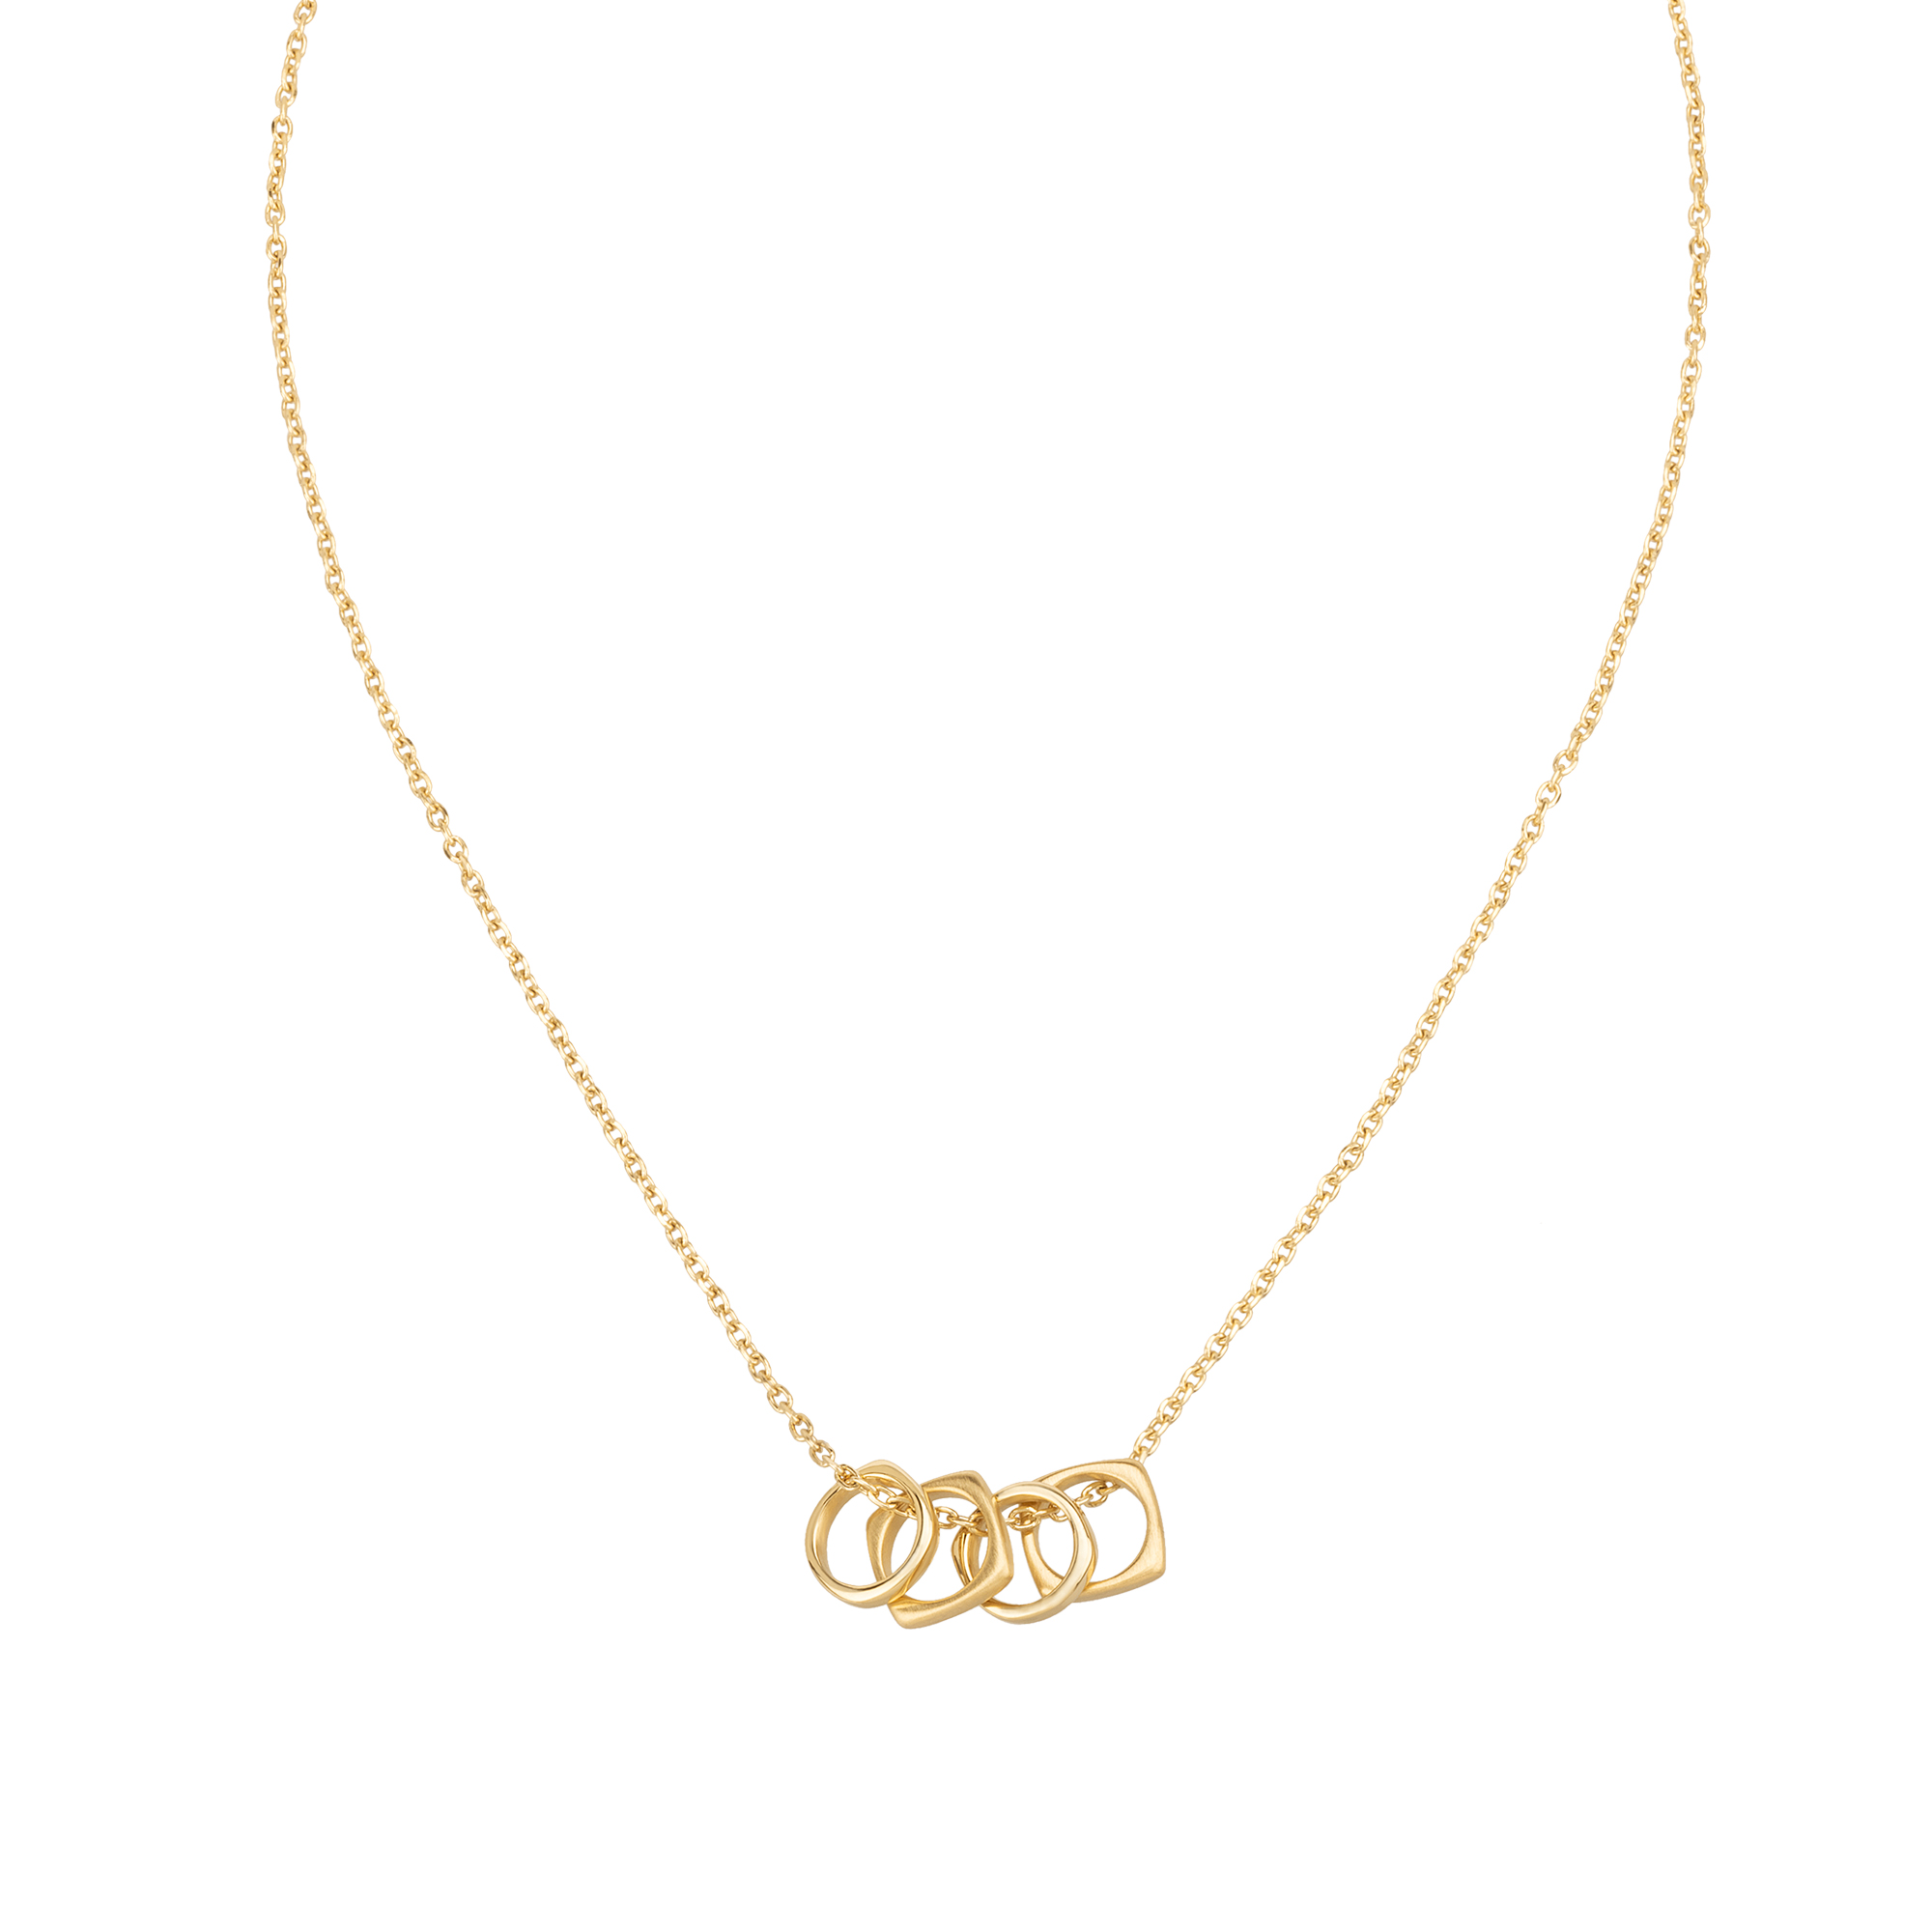 NEW TETRA - IP GOLD STEEL NECKLACE WITH MICRO-CHAIN AND PENDANTS - 2 - TJ3166 | Breil